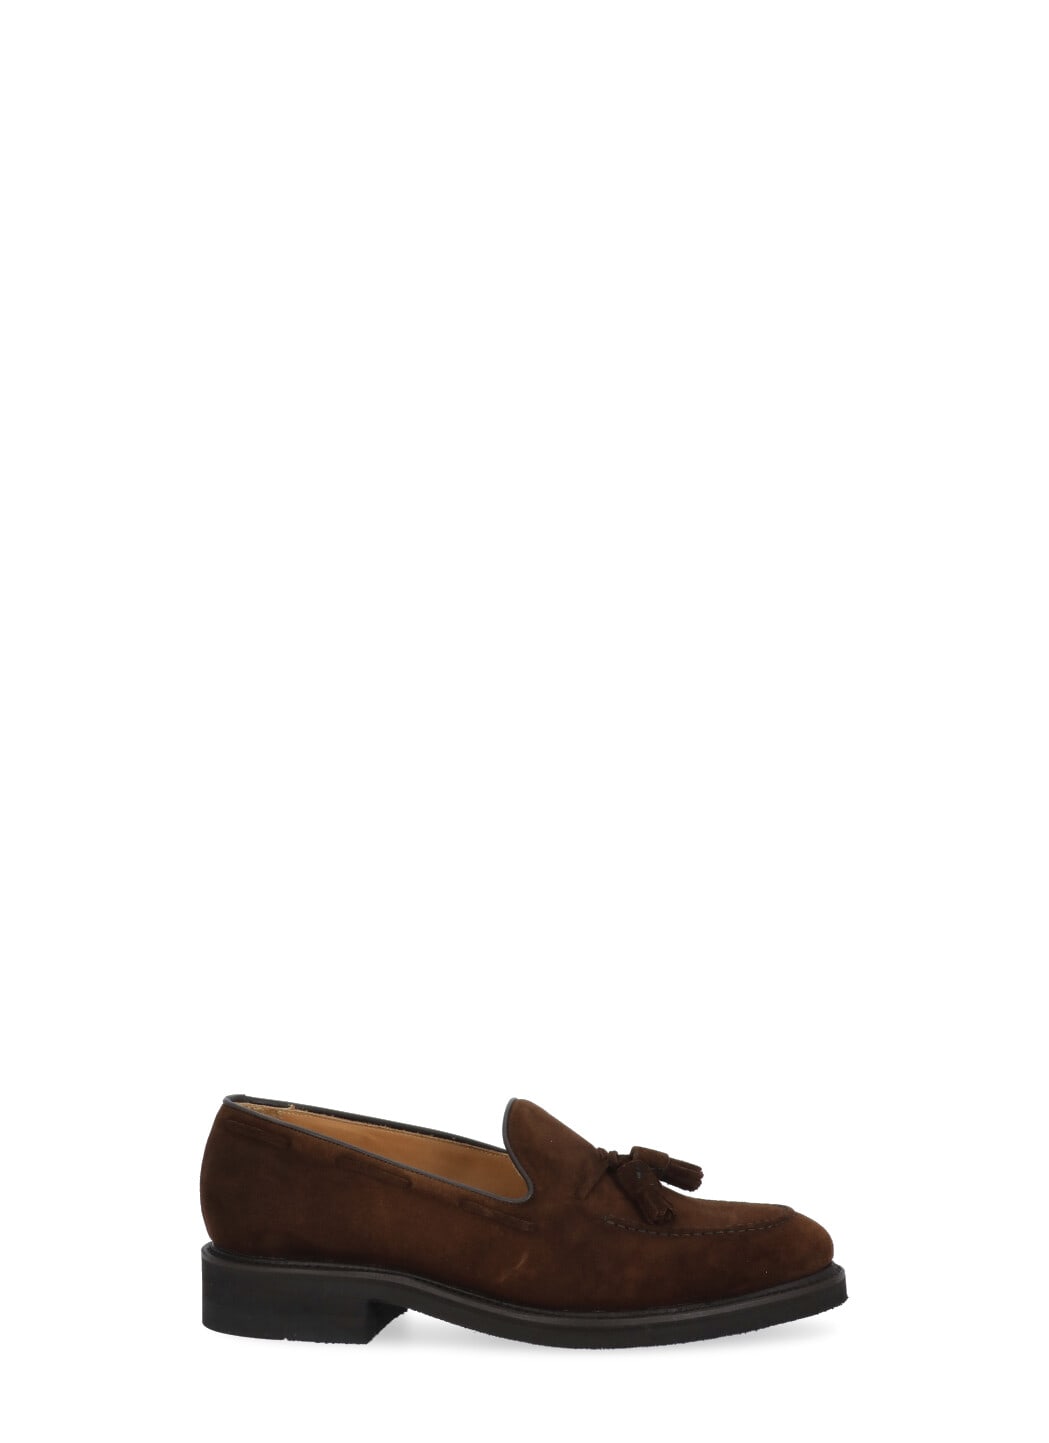 Berwick 1707 Suede Leather Loafers